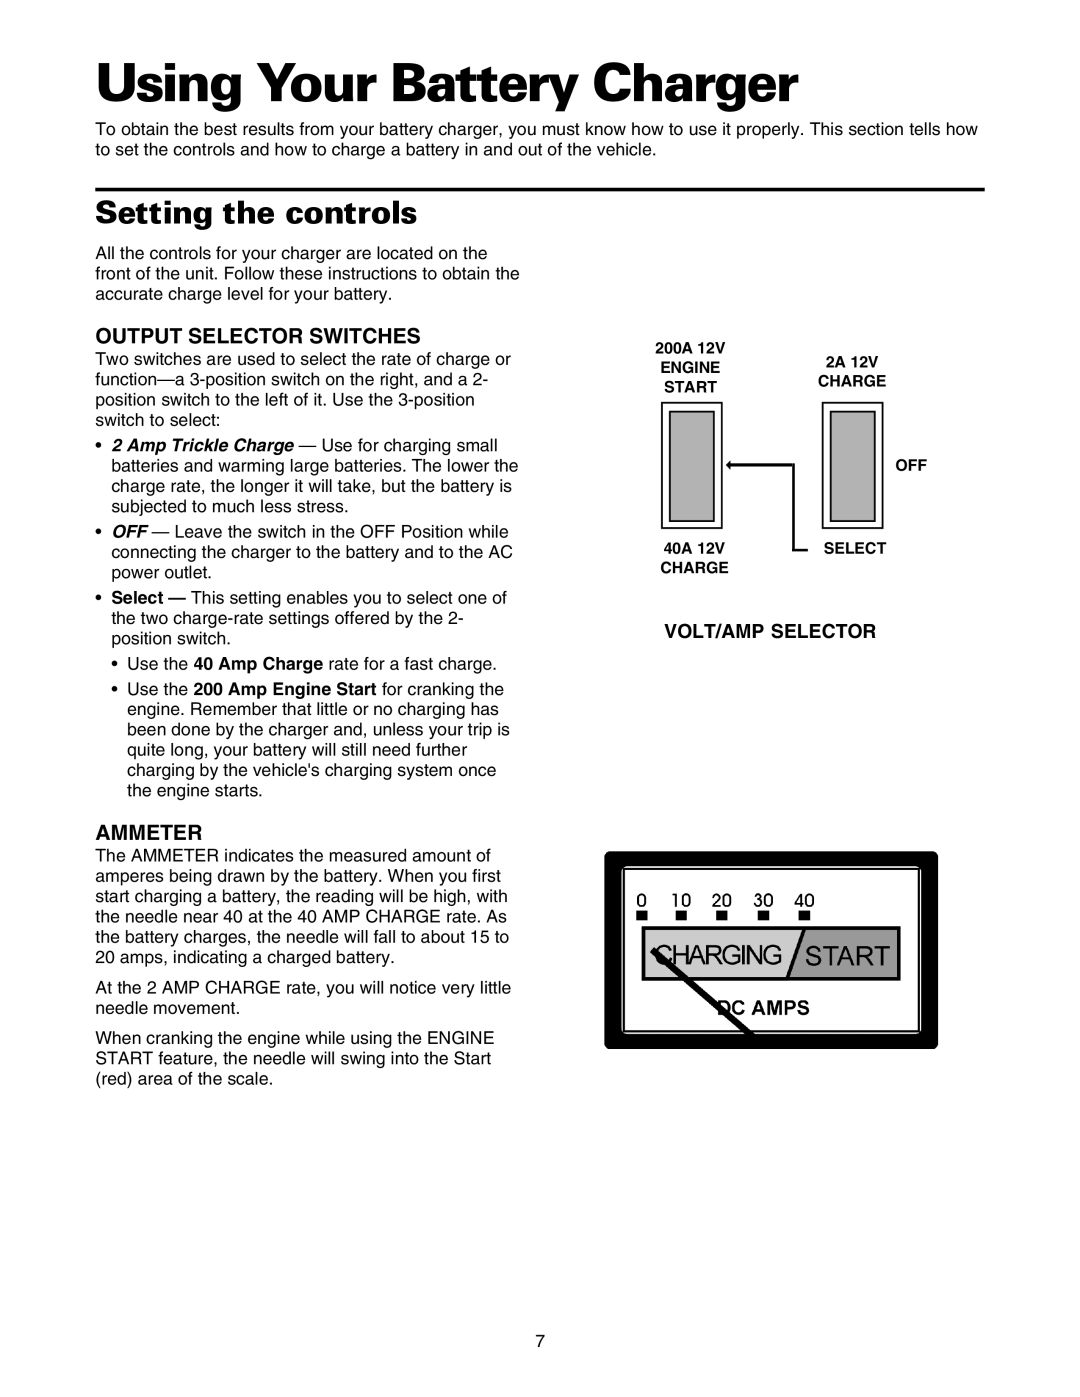 Sears 200.71231 Using Your Battery Charger, Setting the controls, Output Selector Switches, Ammeter, Volt/Amp Selector 